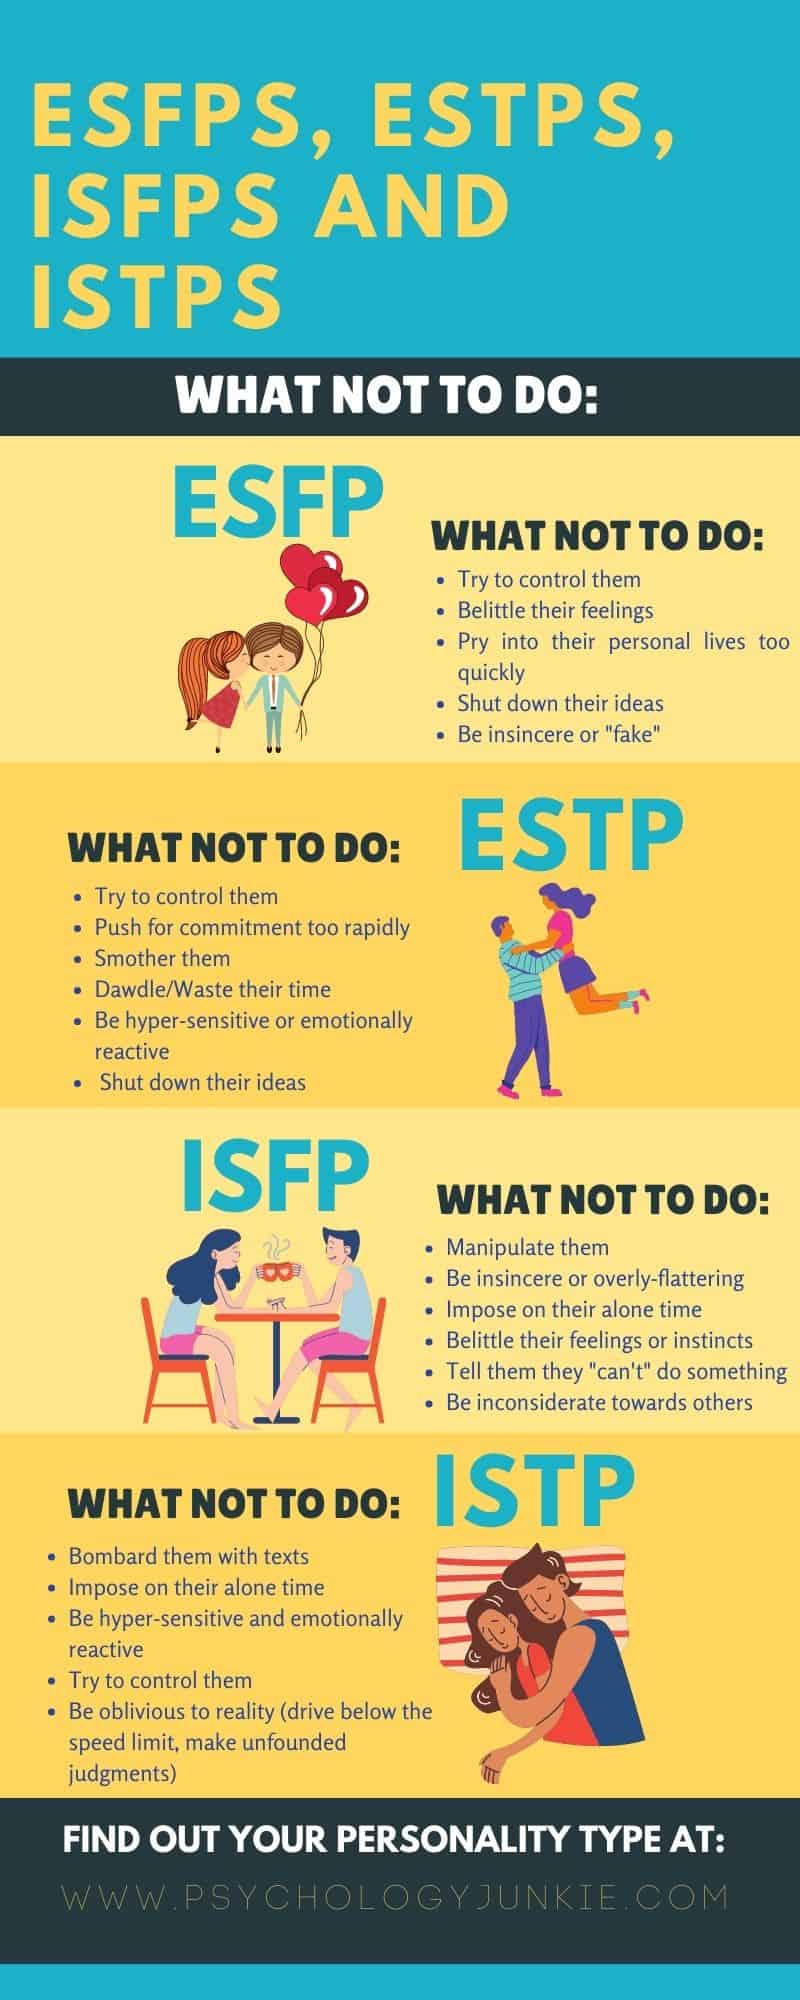 Find out what NOT to do in a relationship with an ESFP, ESTP, ISFP, or ISTP. #MBTI #Personality